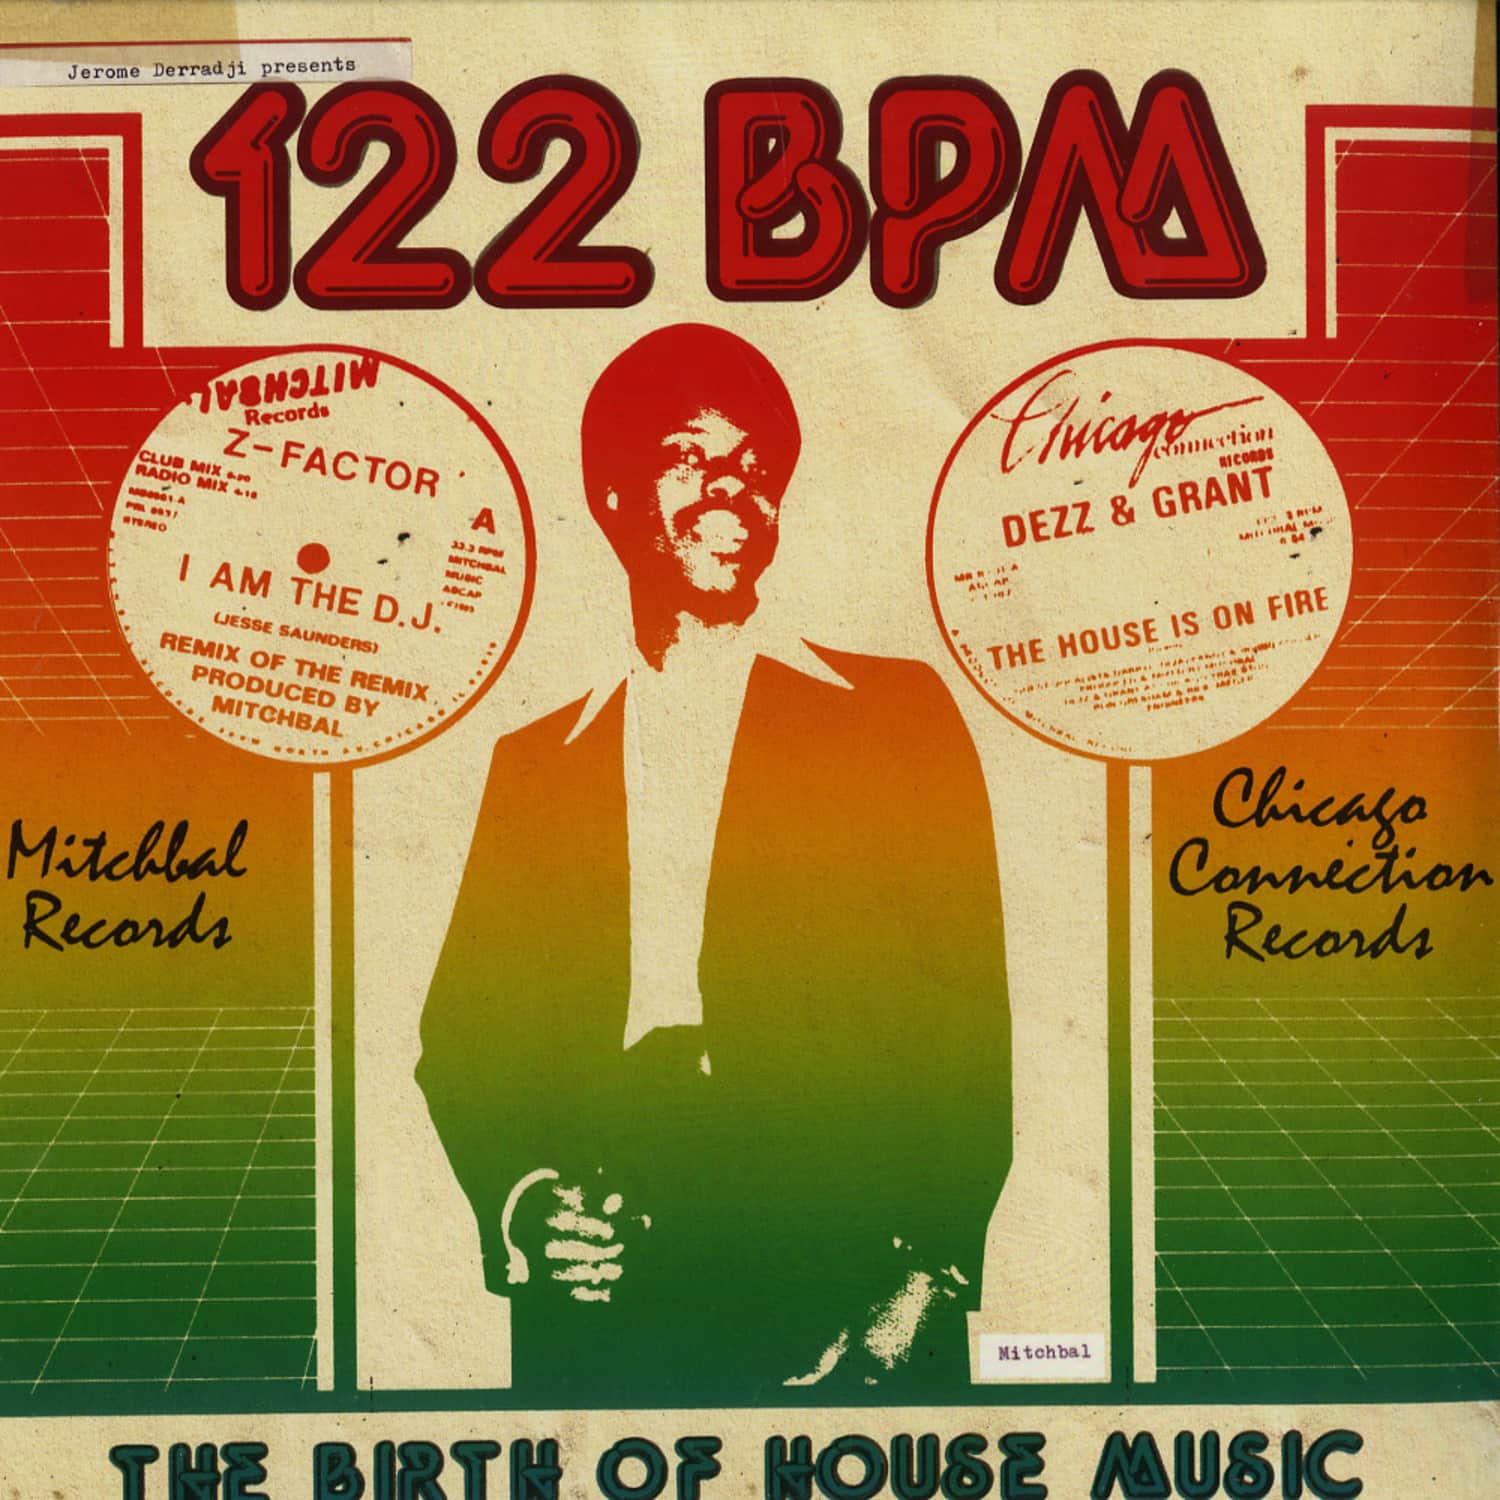 Jerome Derradji Presents - 122 BPM - THE BIRTH OF HOUSE MUSIC - MITCHBAL RECORDS & CHICAGO CONNECTION RECORDS 